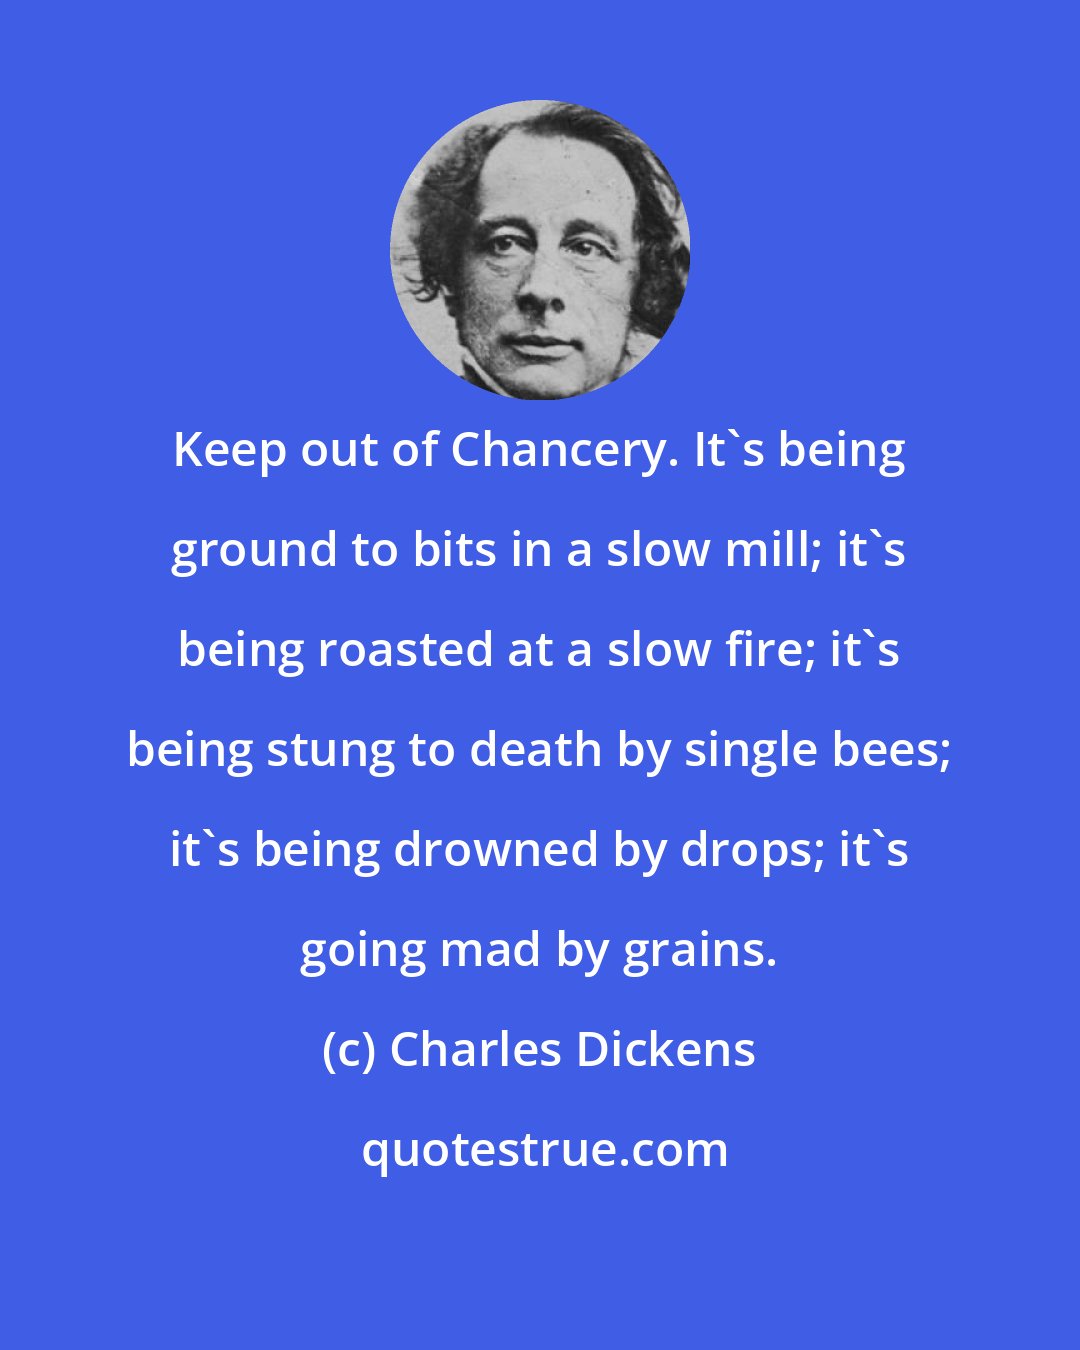 Charles Dickens: Keep out of Chancery. It's being ground to bits in a slow mill; it's being roasted at a slow fire; it's being stung to death by single bees; it's being drowned by drops; it's going mad by grains.